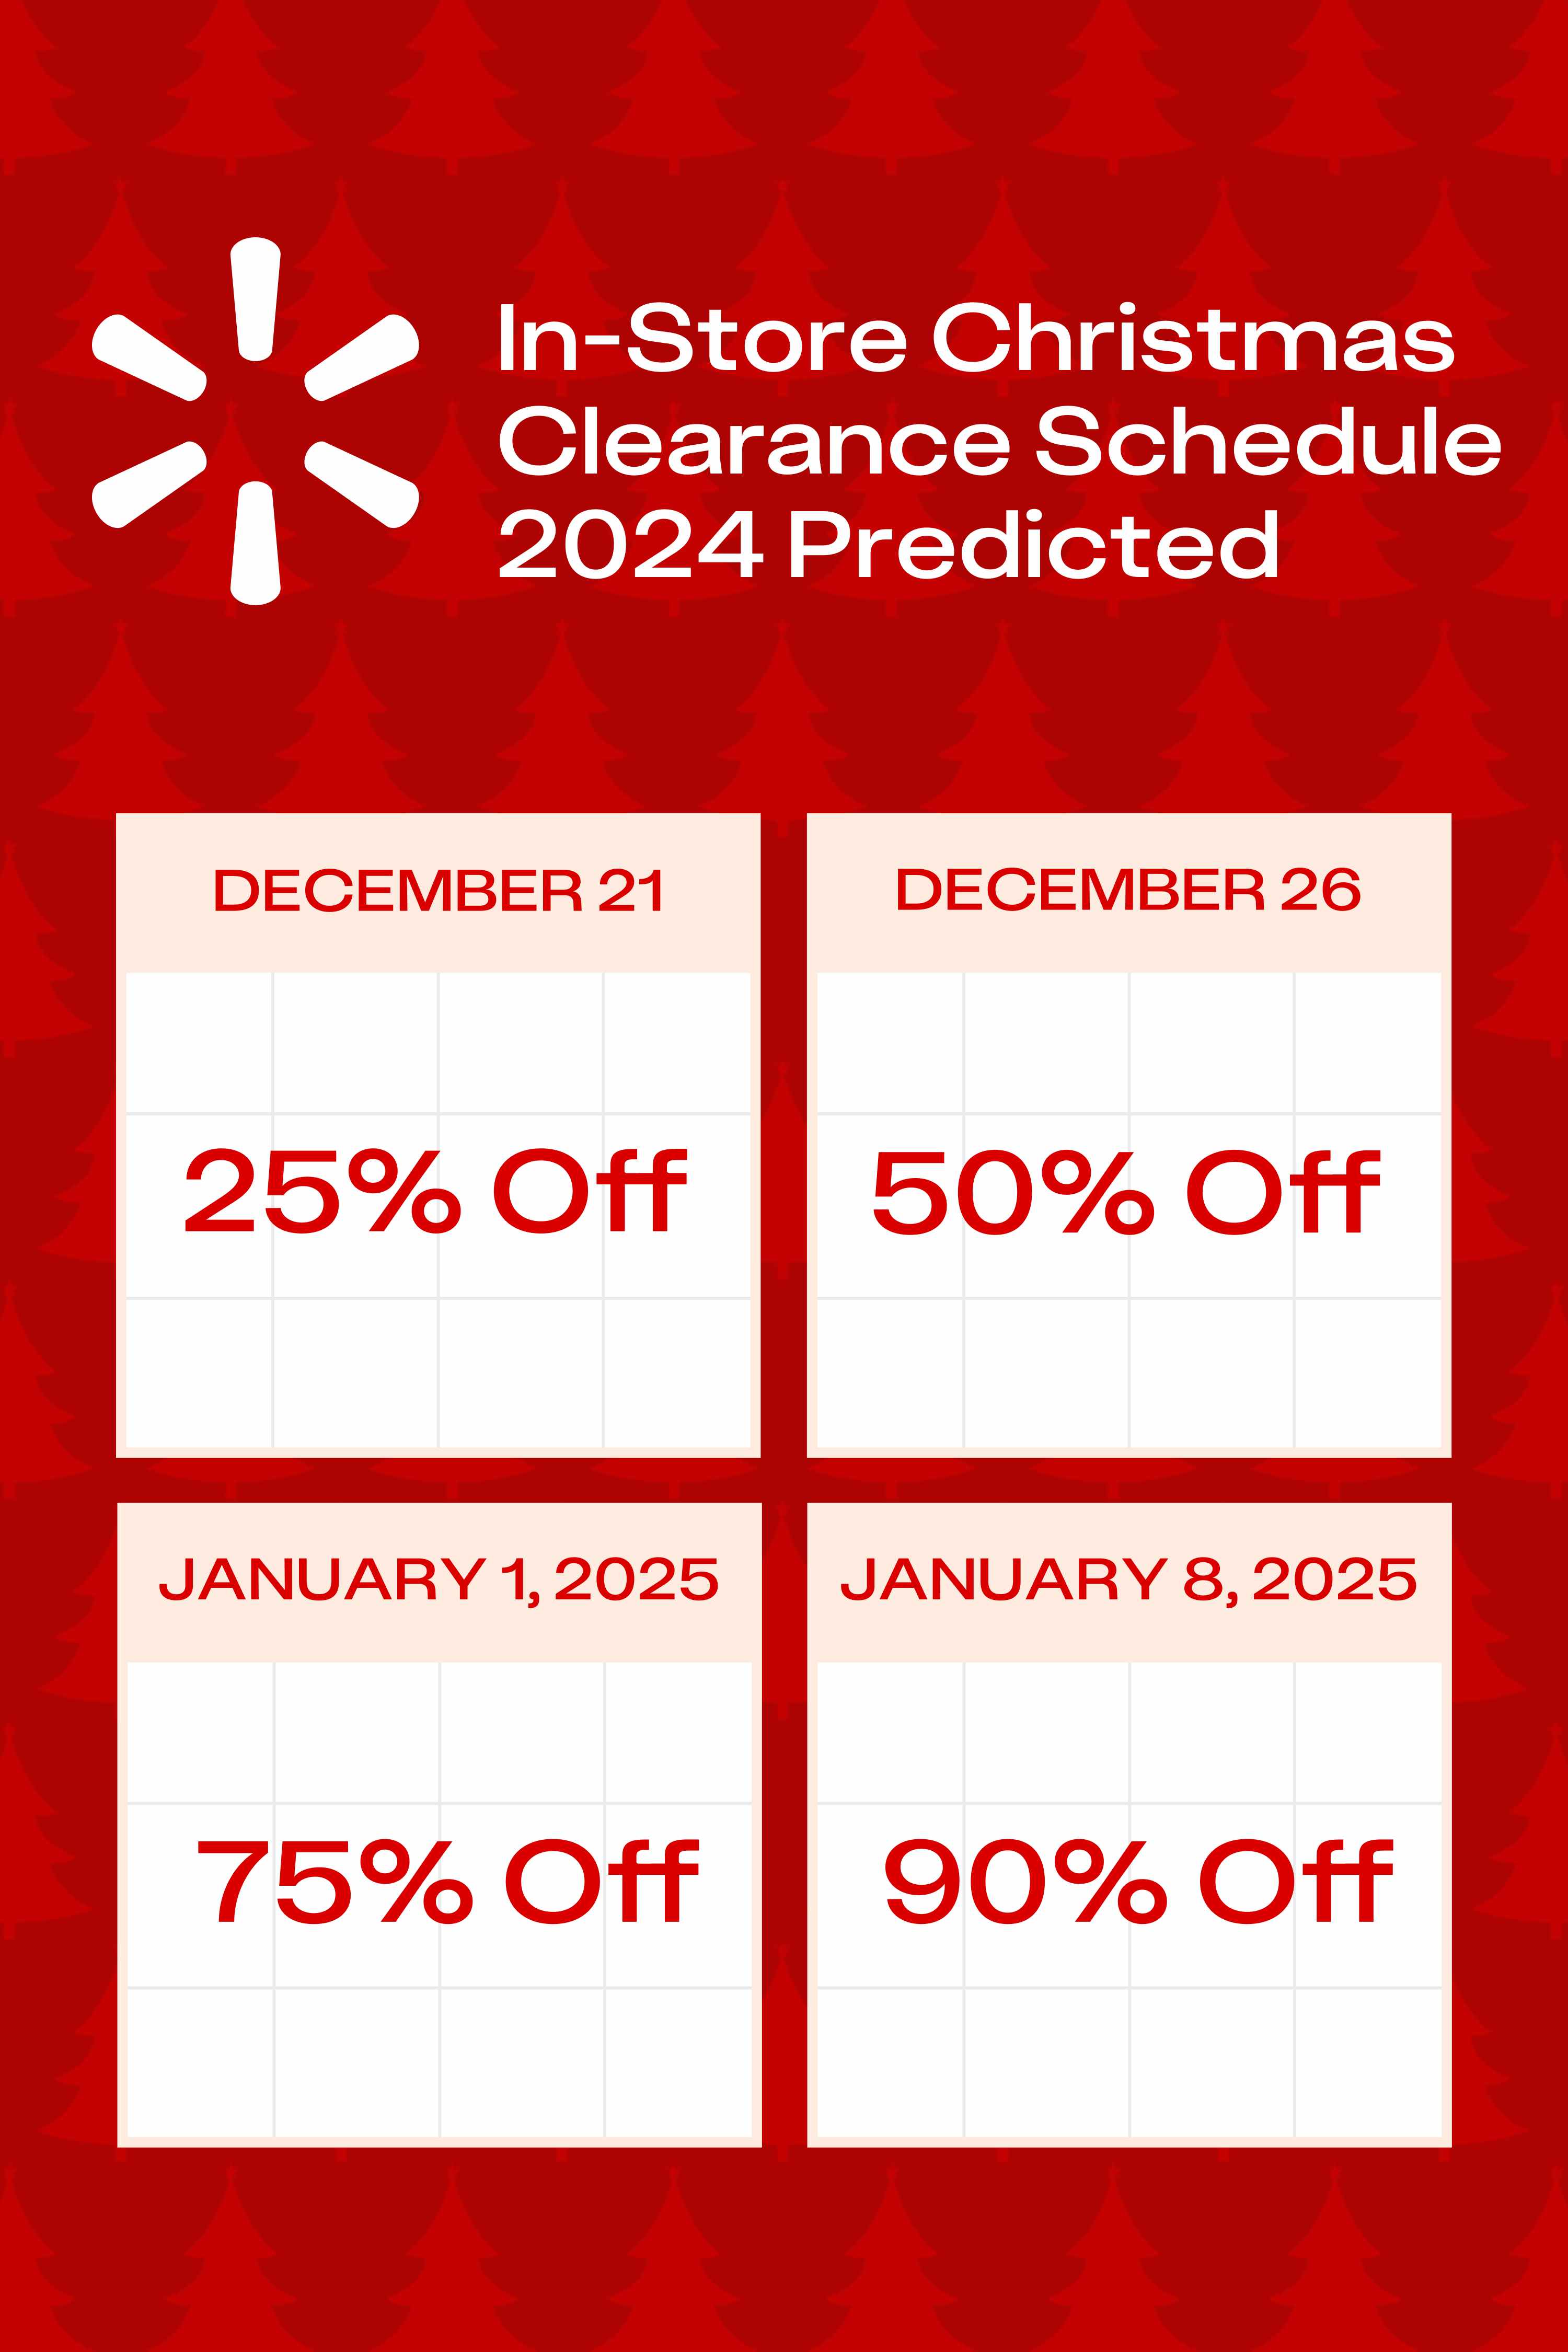 Walmart In-Store Christmas Clearance Schedule 2024